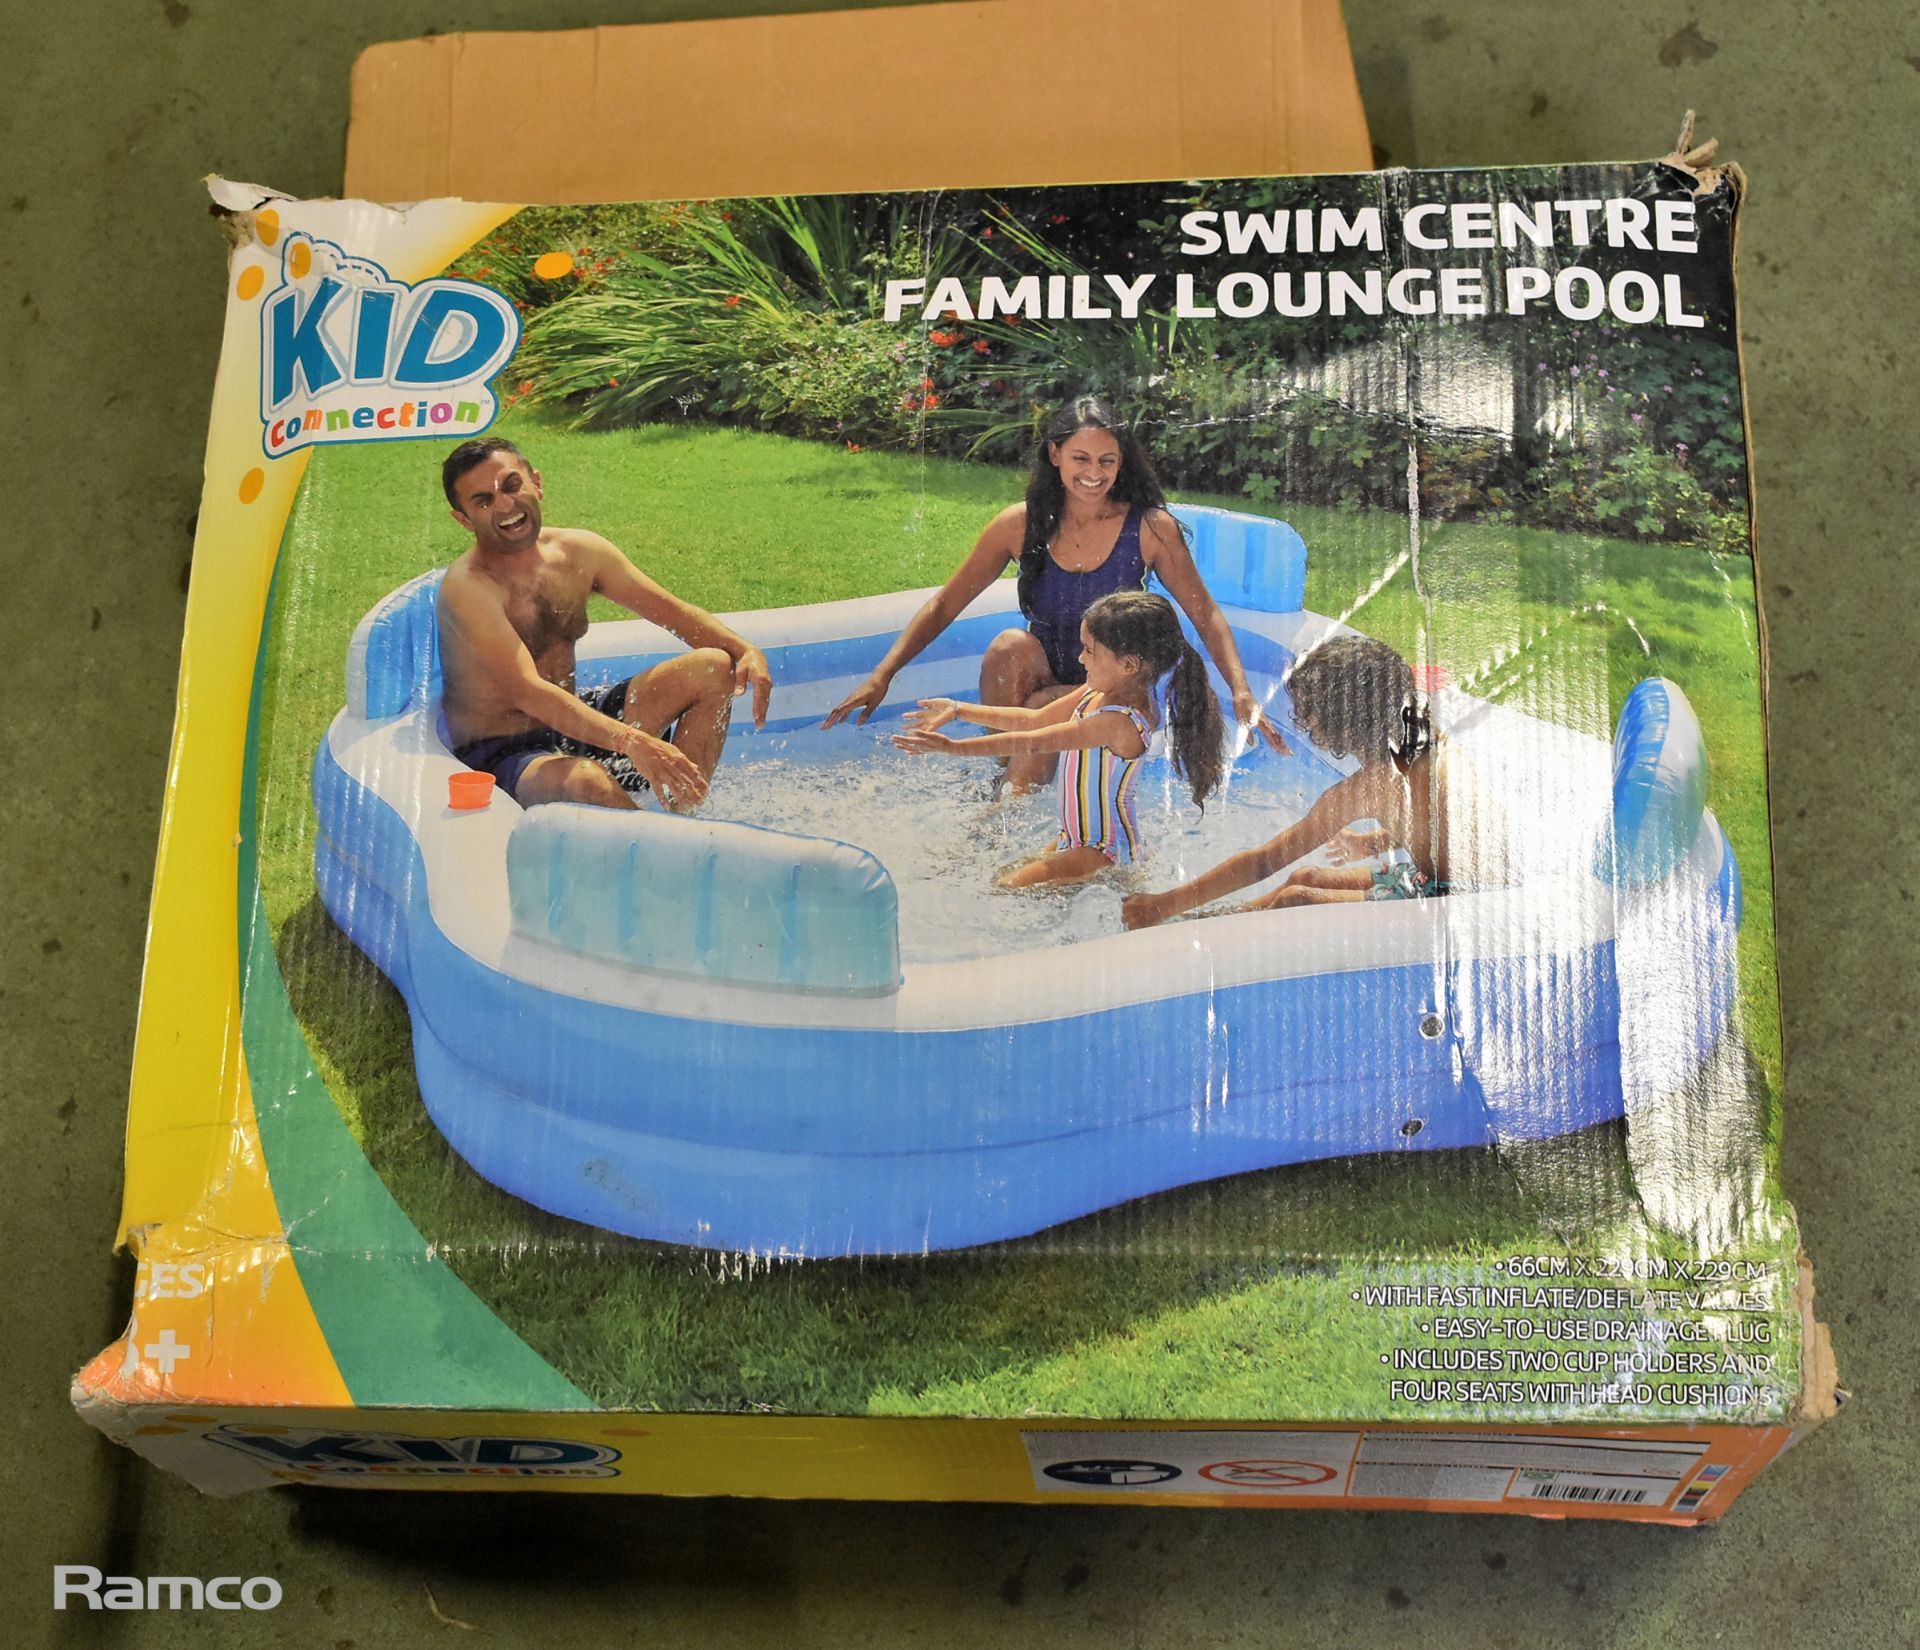 3x Kid Connection - various sized swimming pools - RETAIL RETURNS - Image 4 of 7